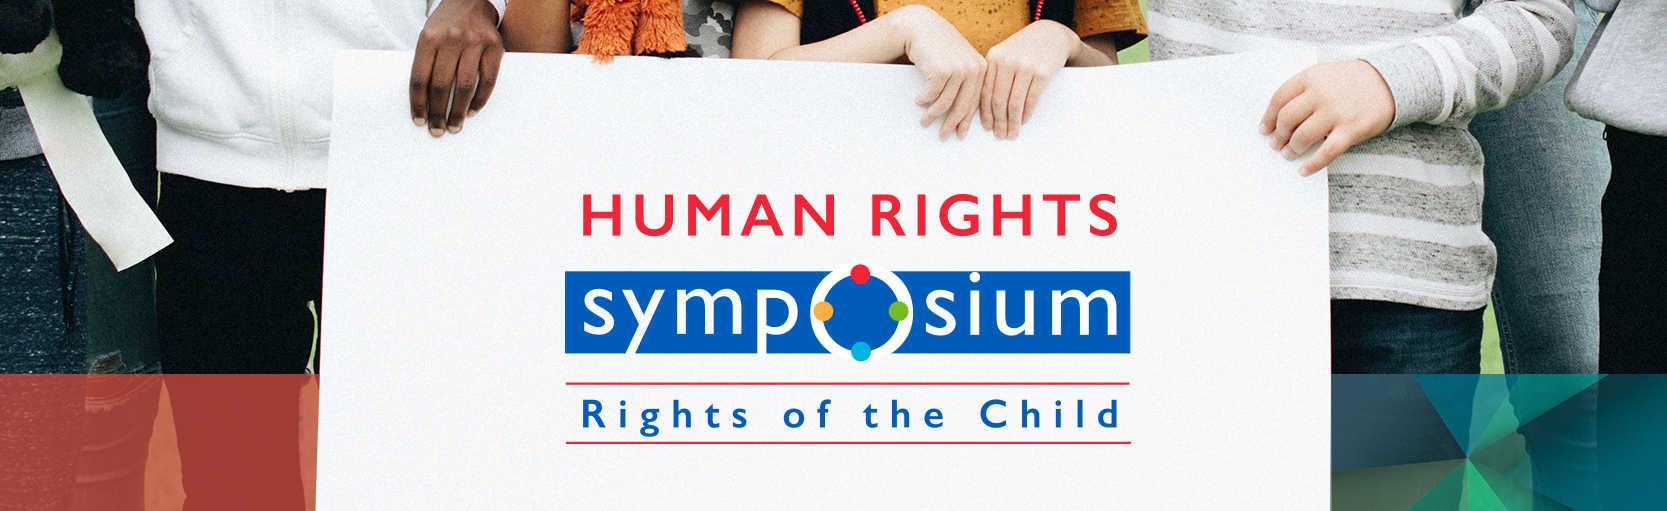 Children holding up a sign in a field with the Halton District School Board Human Rights Symposium logo